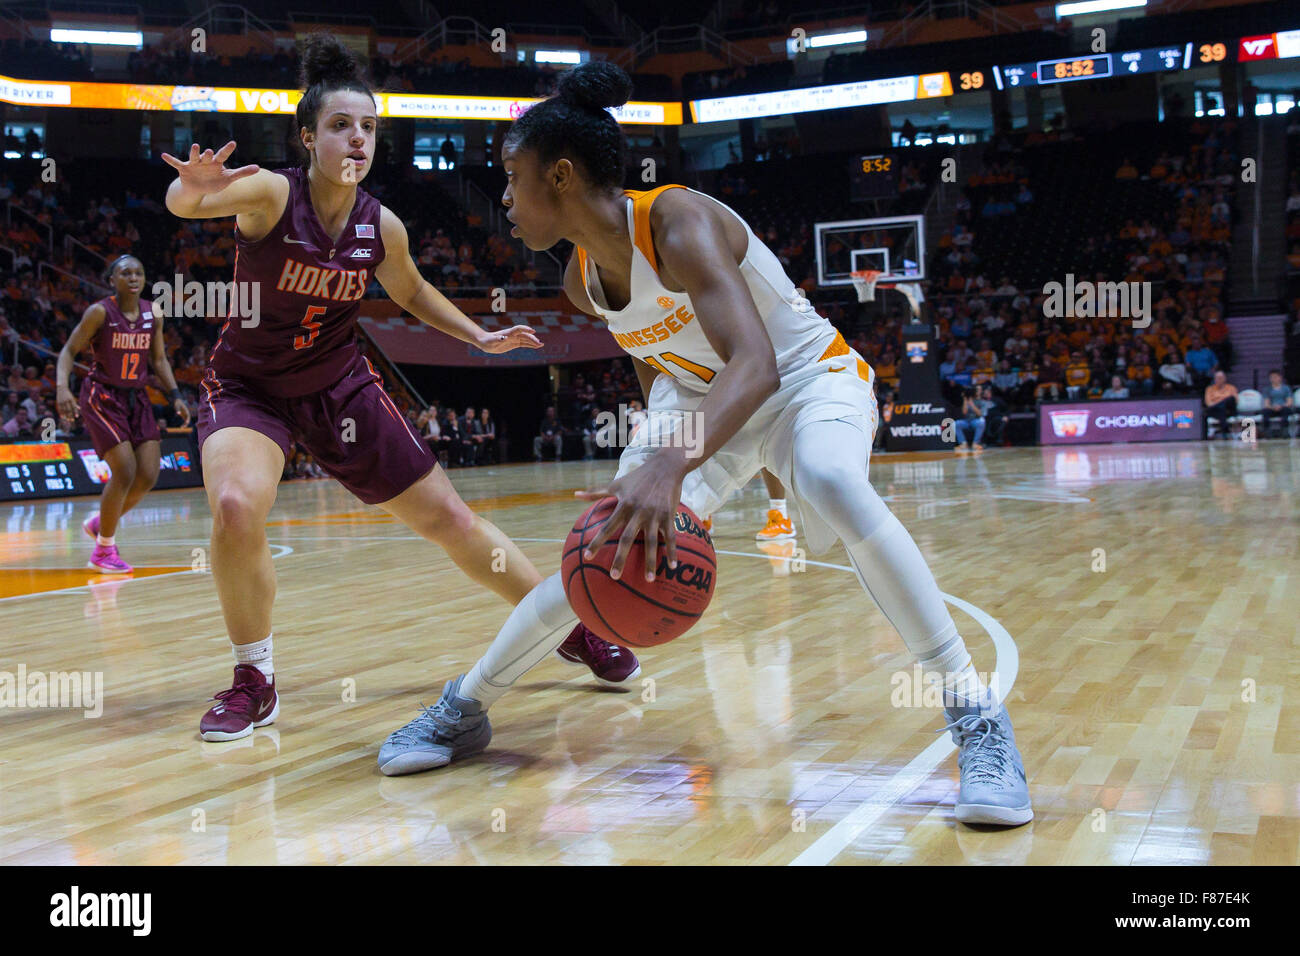 December 6, 2015: Diamond DeShields #11 of the Tennessee Lady Volunteers drives to the basket againt Vanessa Panousis #5 of the Virginia Tech Hokies during the NCAA basketball game between the University of Tennessee Lady Volunteers and the Virginia Tech Hokies at Thompson Boling Arena in Knoxville TN Tim Gangloff/CSM Stock Photo